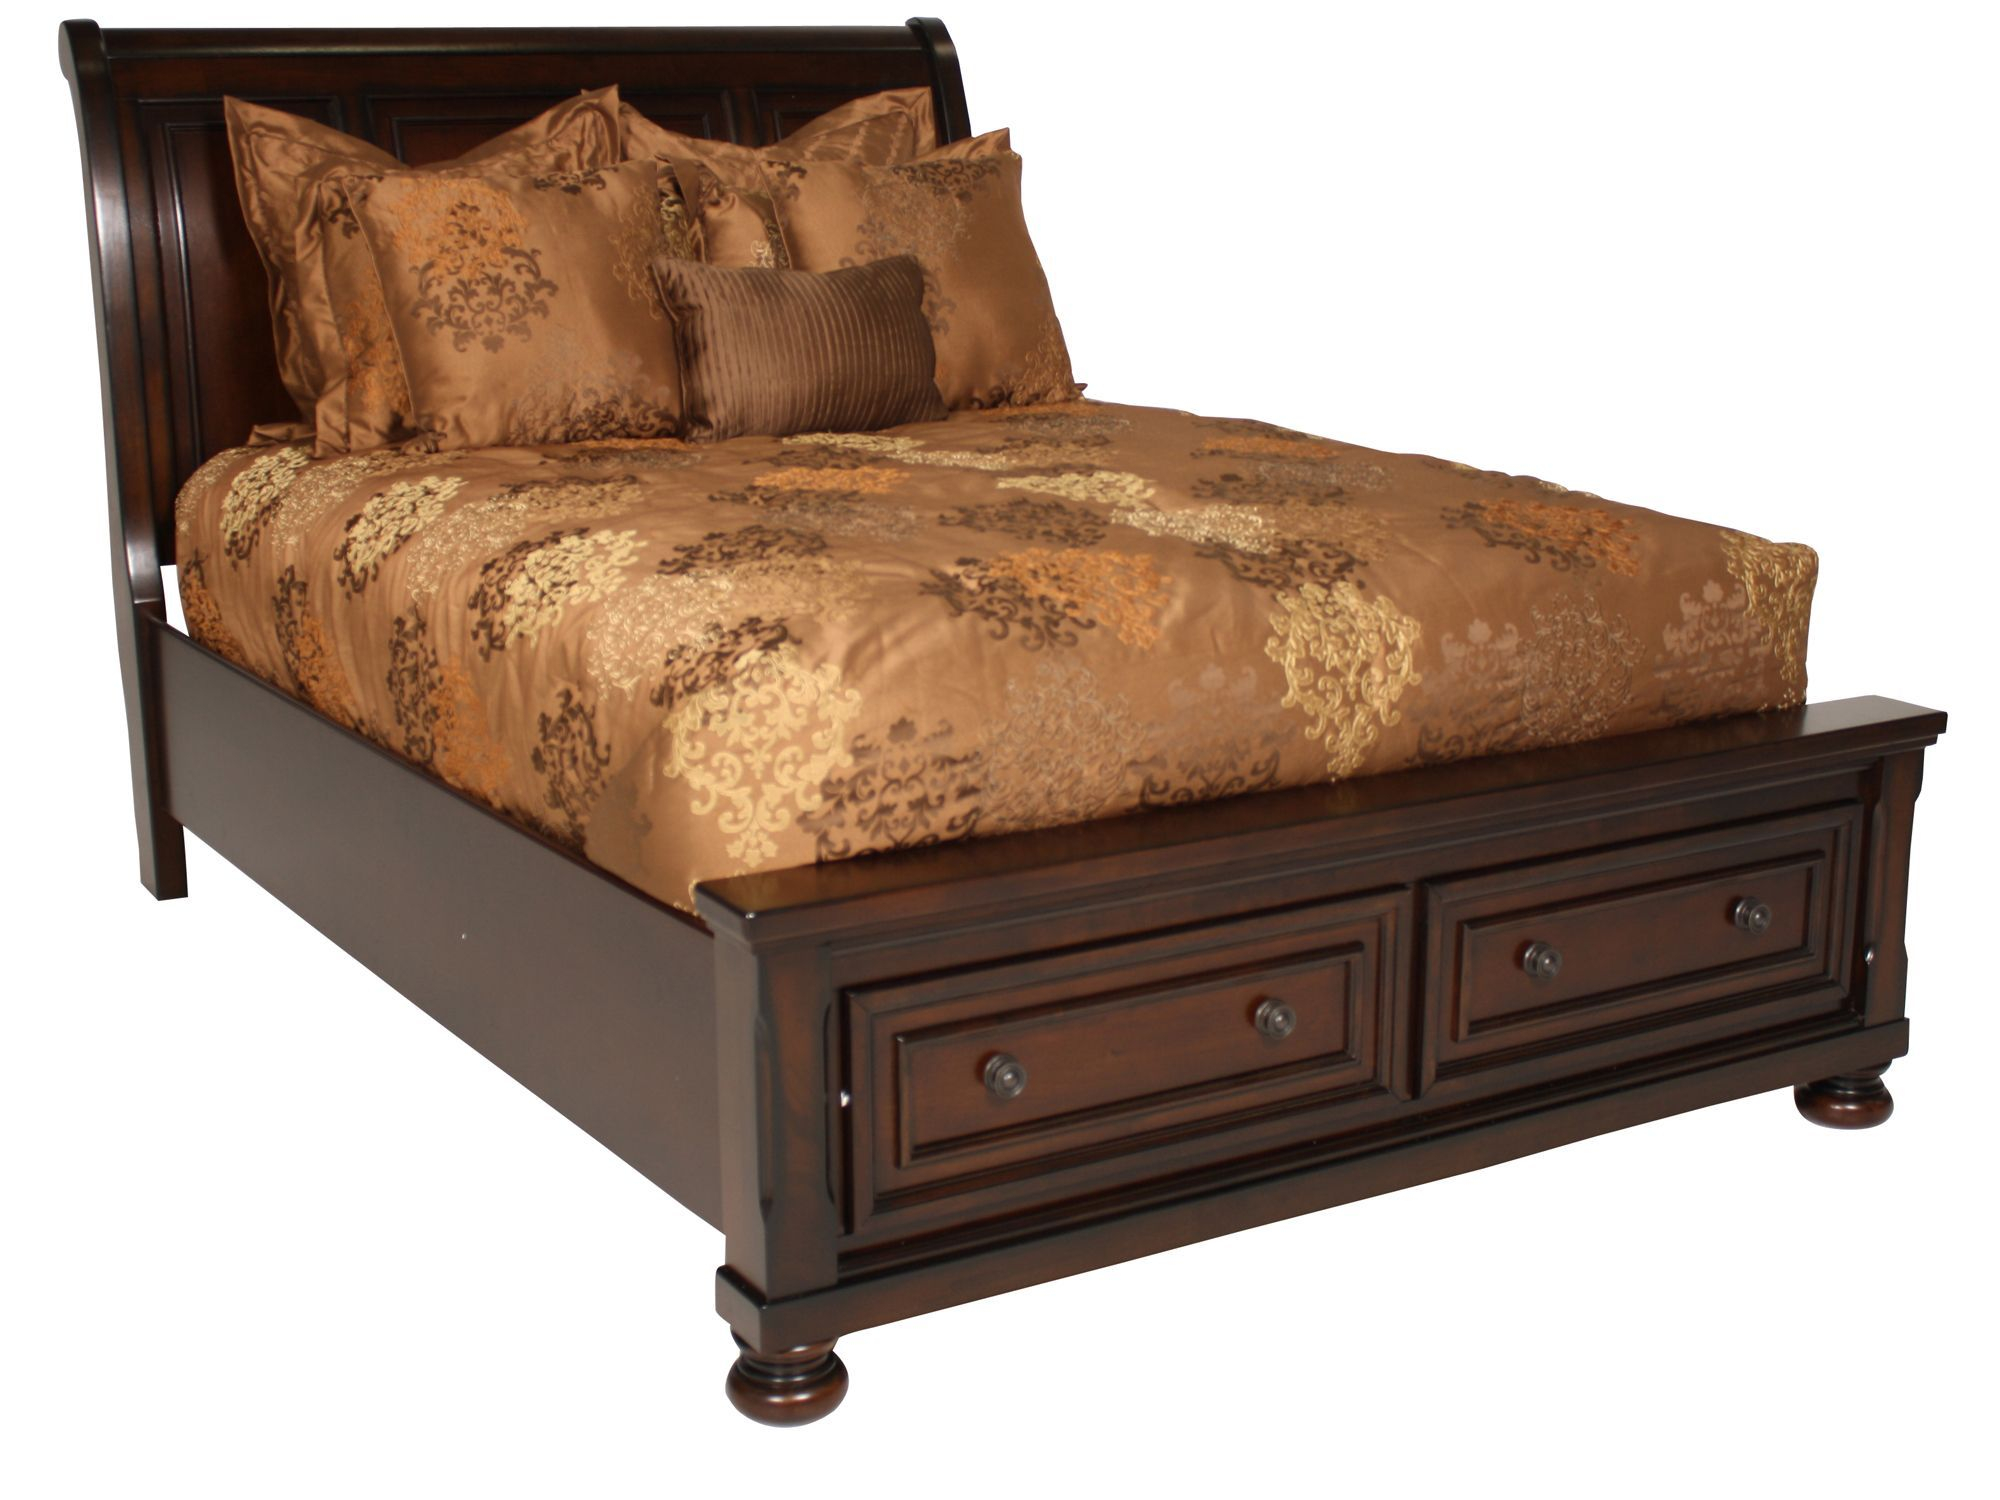 Ashely Porter King Size Sleigh Bed With Storage Decor Galore intended for proportions 2000 X 1500